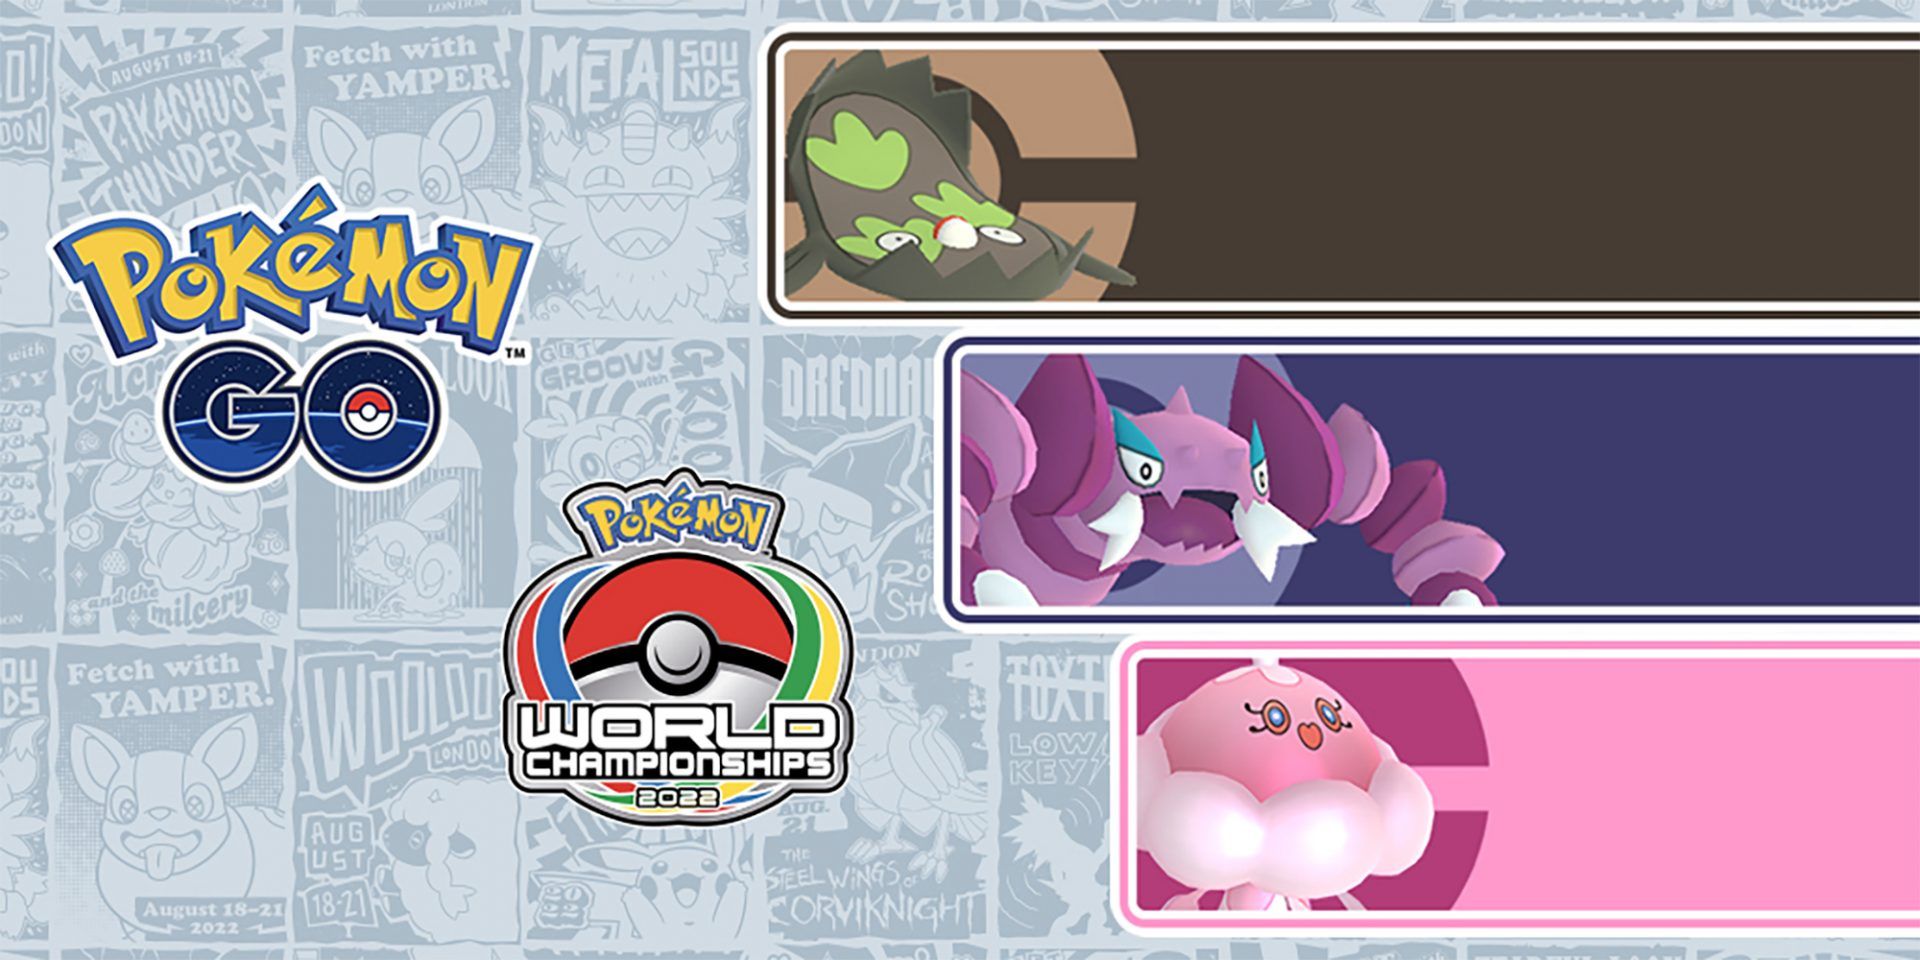 Pokemon GO World Championships 2022 Collection Challenge Guide